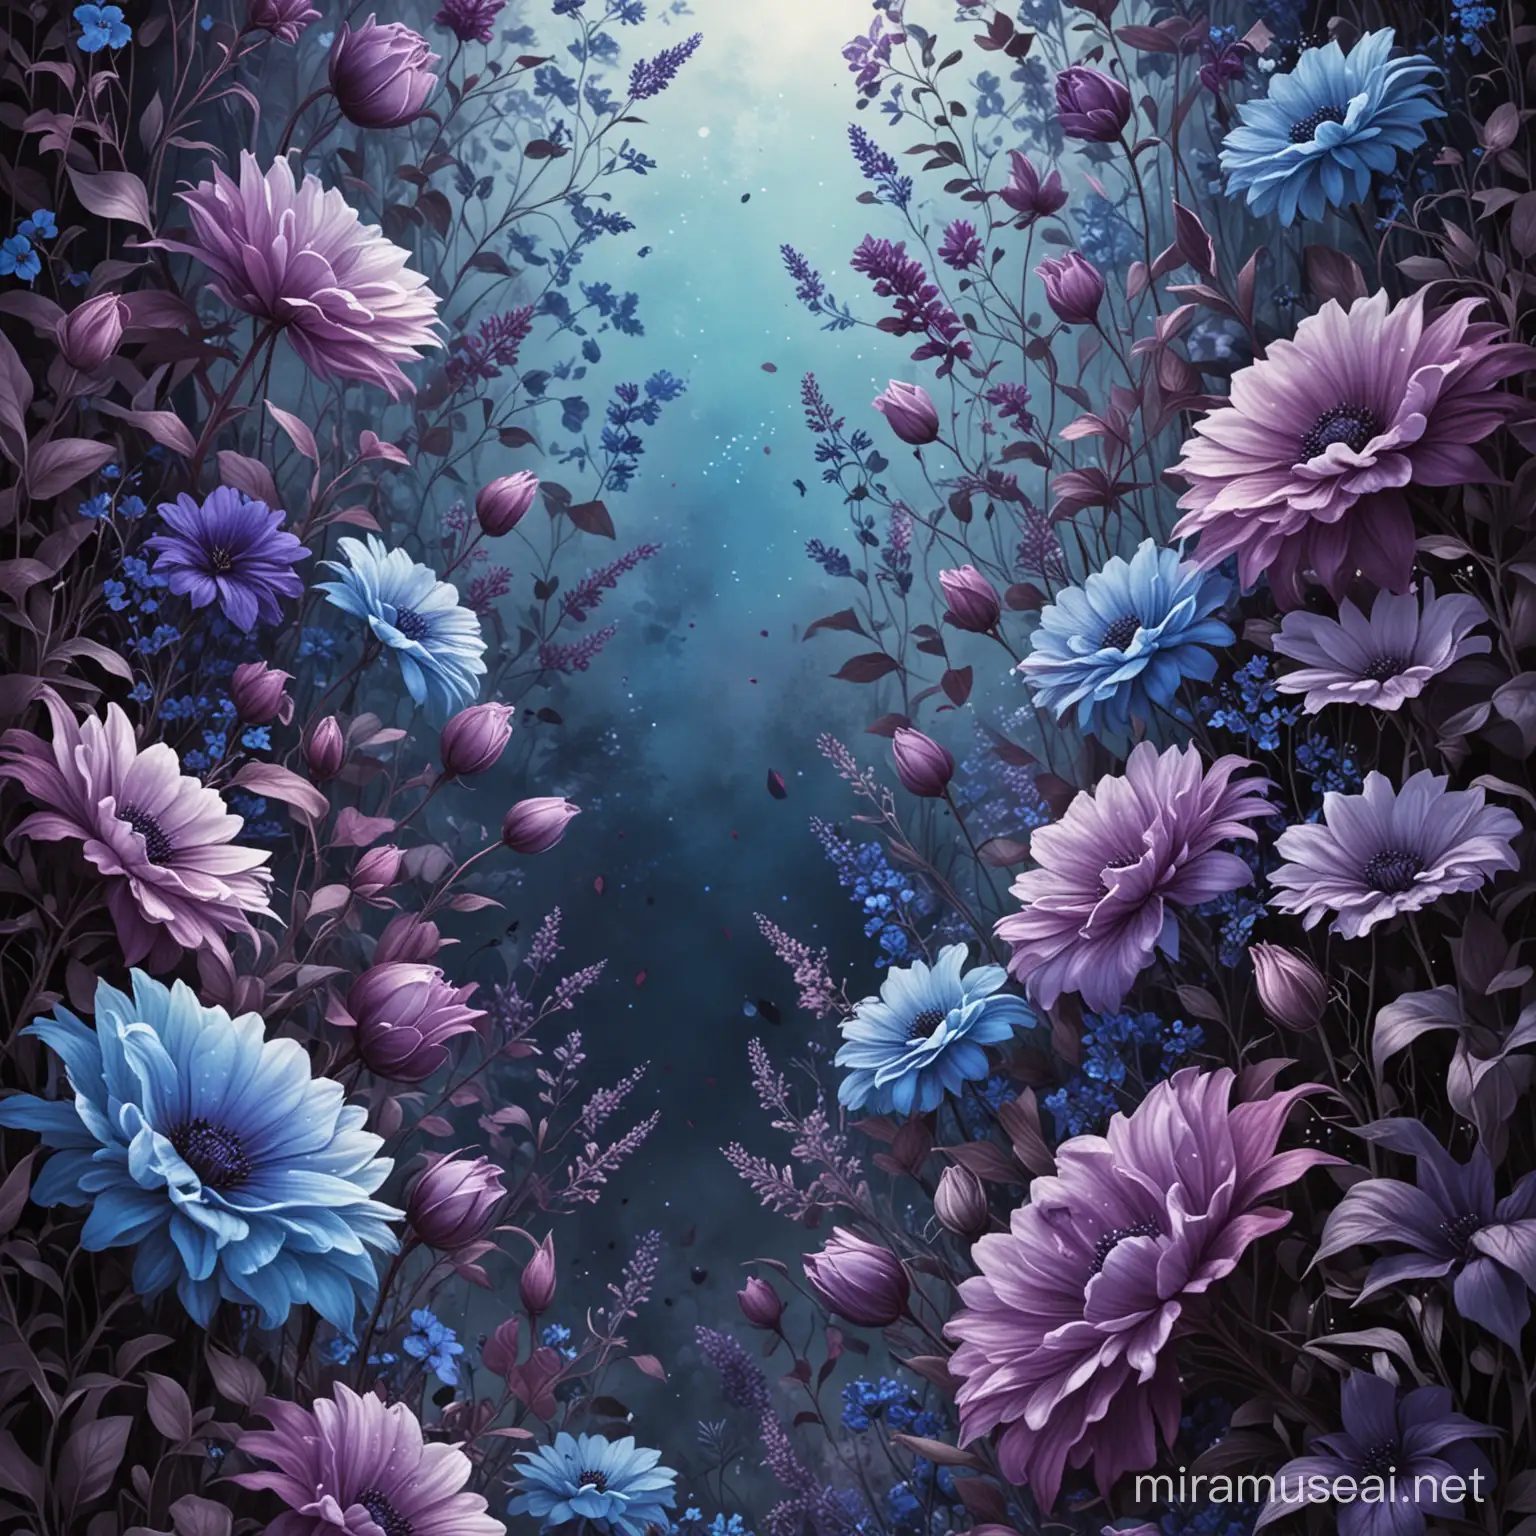 A cover for a romance book with purple and blue dark flowers